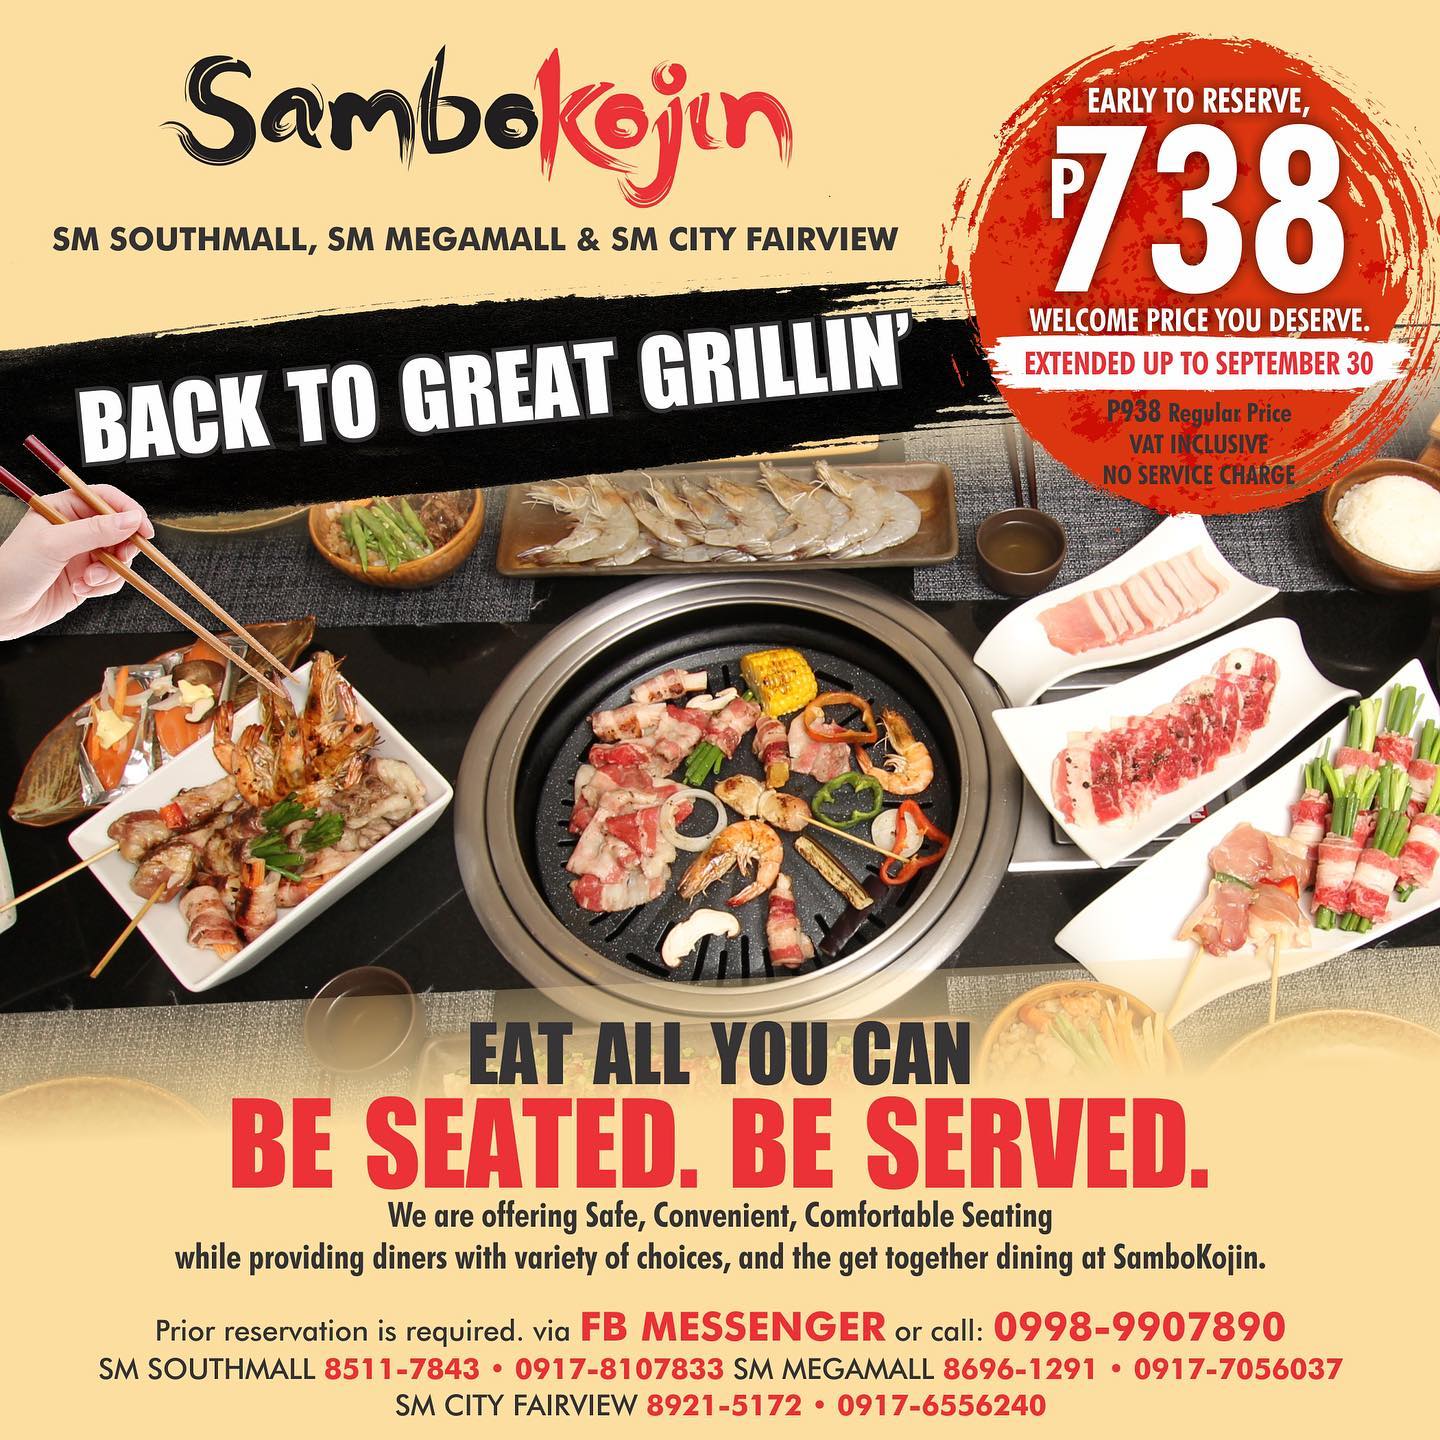 Manila Shopper: Dads & Sambo Kojin Be Seated Be Served Eat-All-You-Can